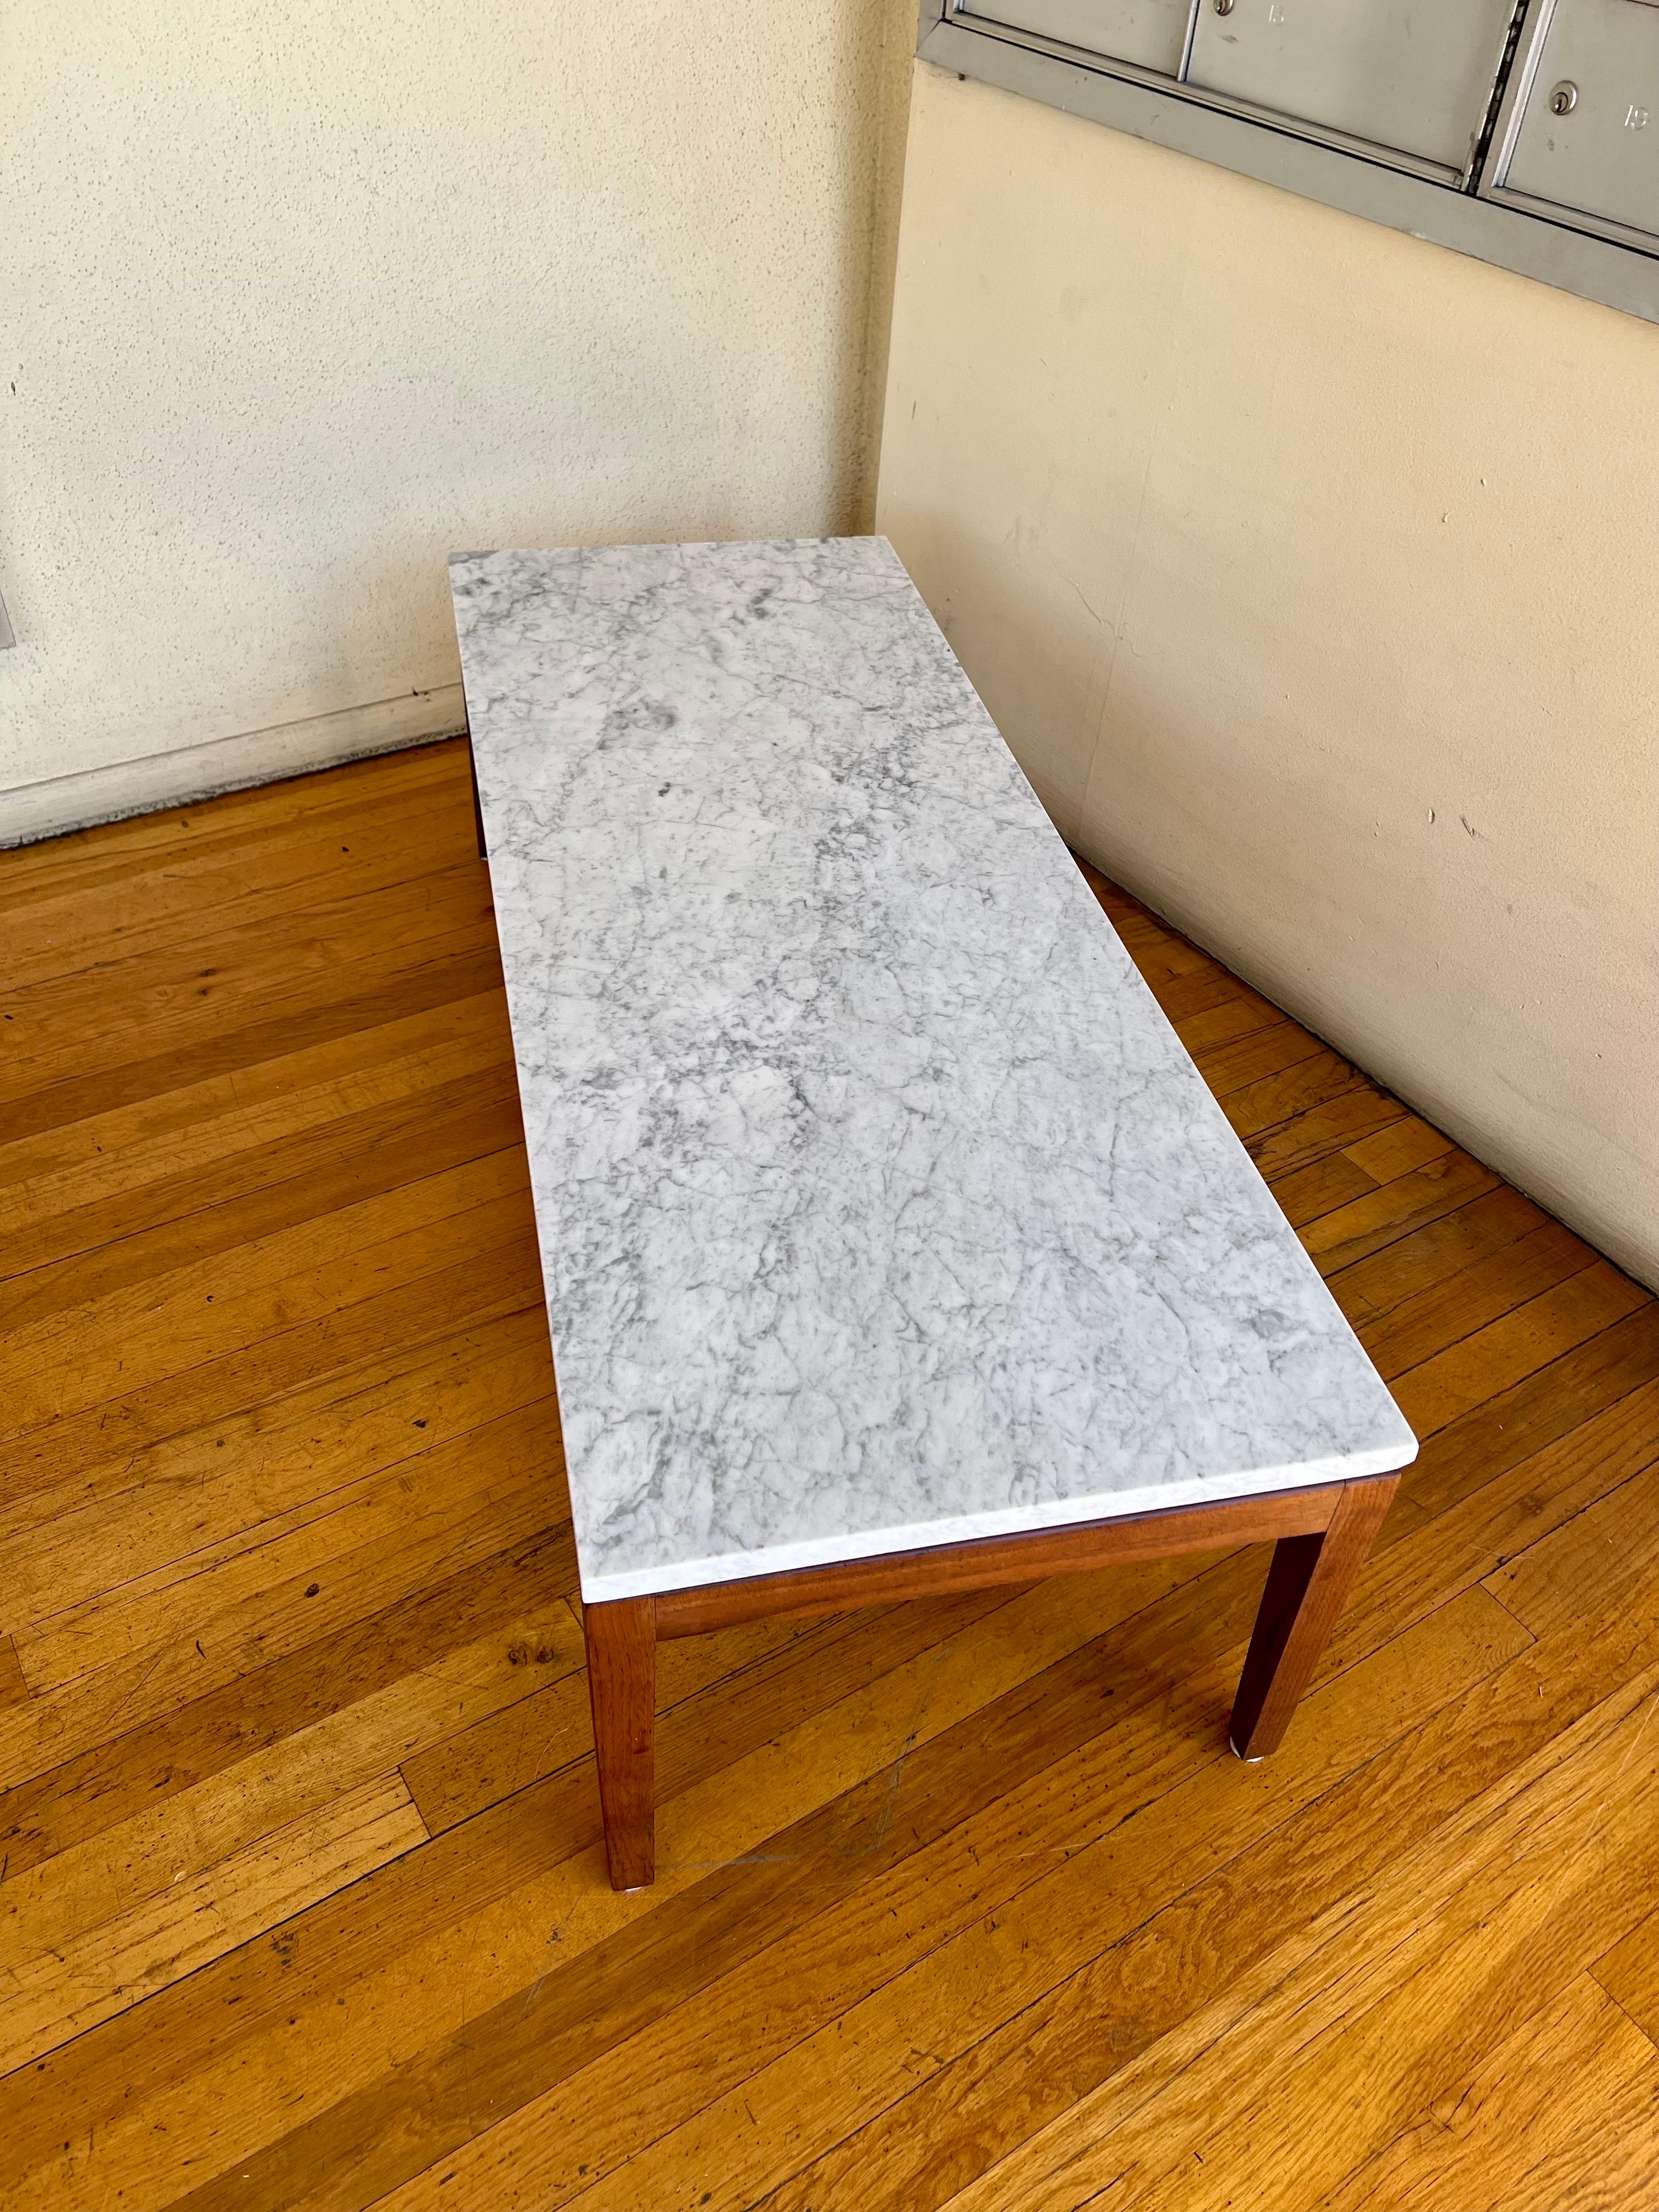 20th Century American Mid-Century Modern Solid Walnut & Marble Low Coffee Table/ Bench